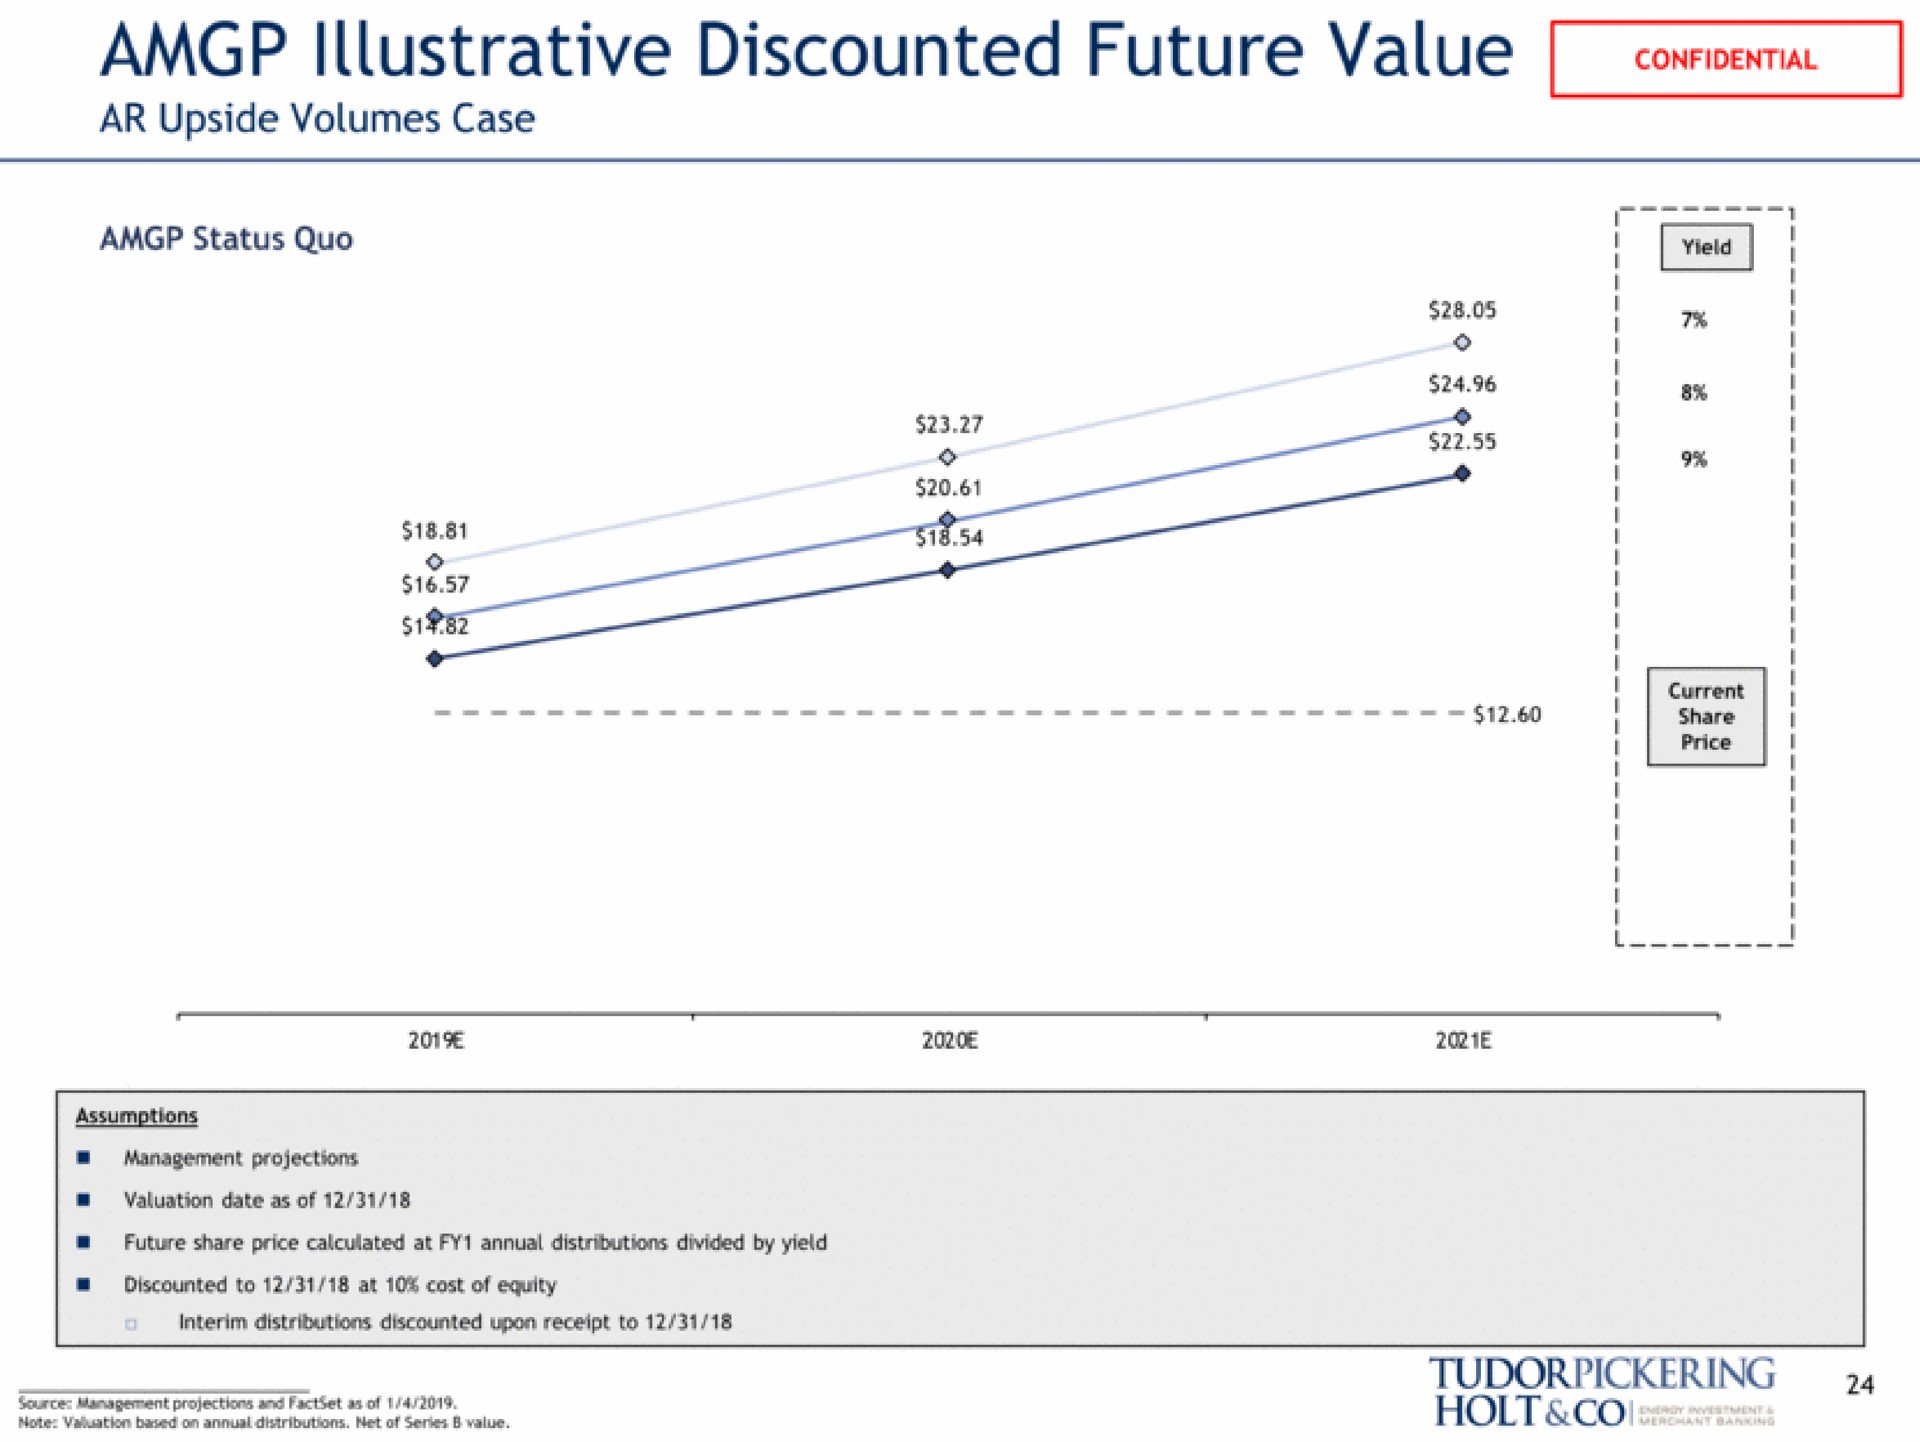 illustrative discounted future value upside volumes case net of series value holt note based on annual | Tudor, Pickering, Holt & Co